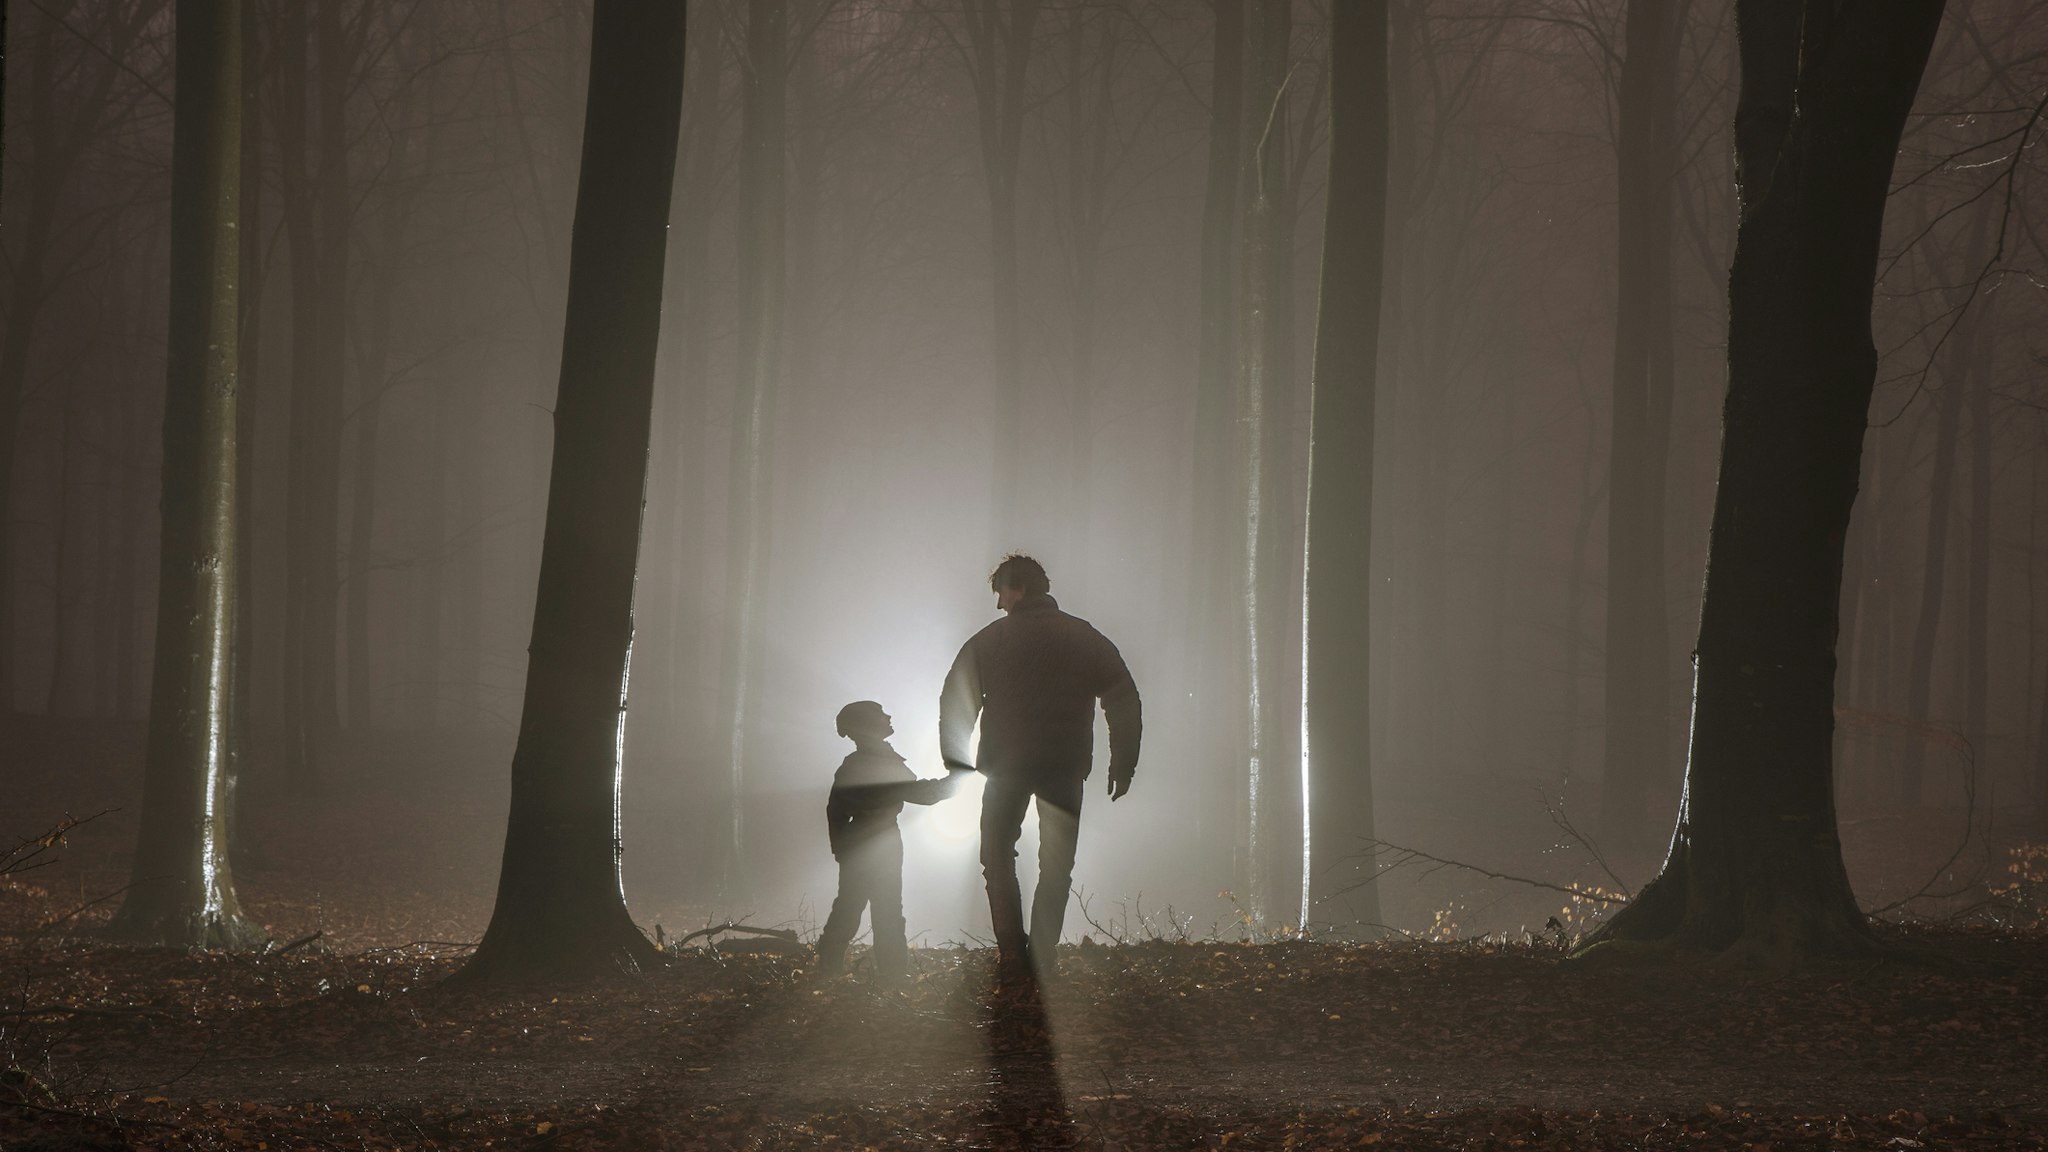 Father and son in misty forest - stock photo